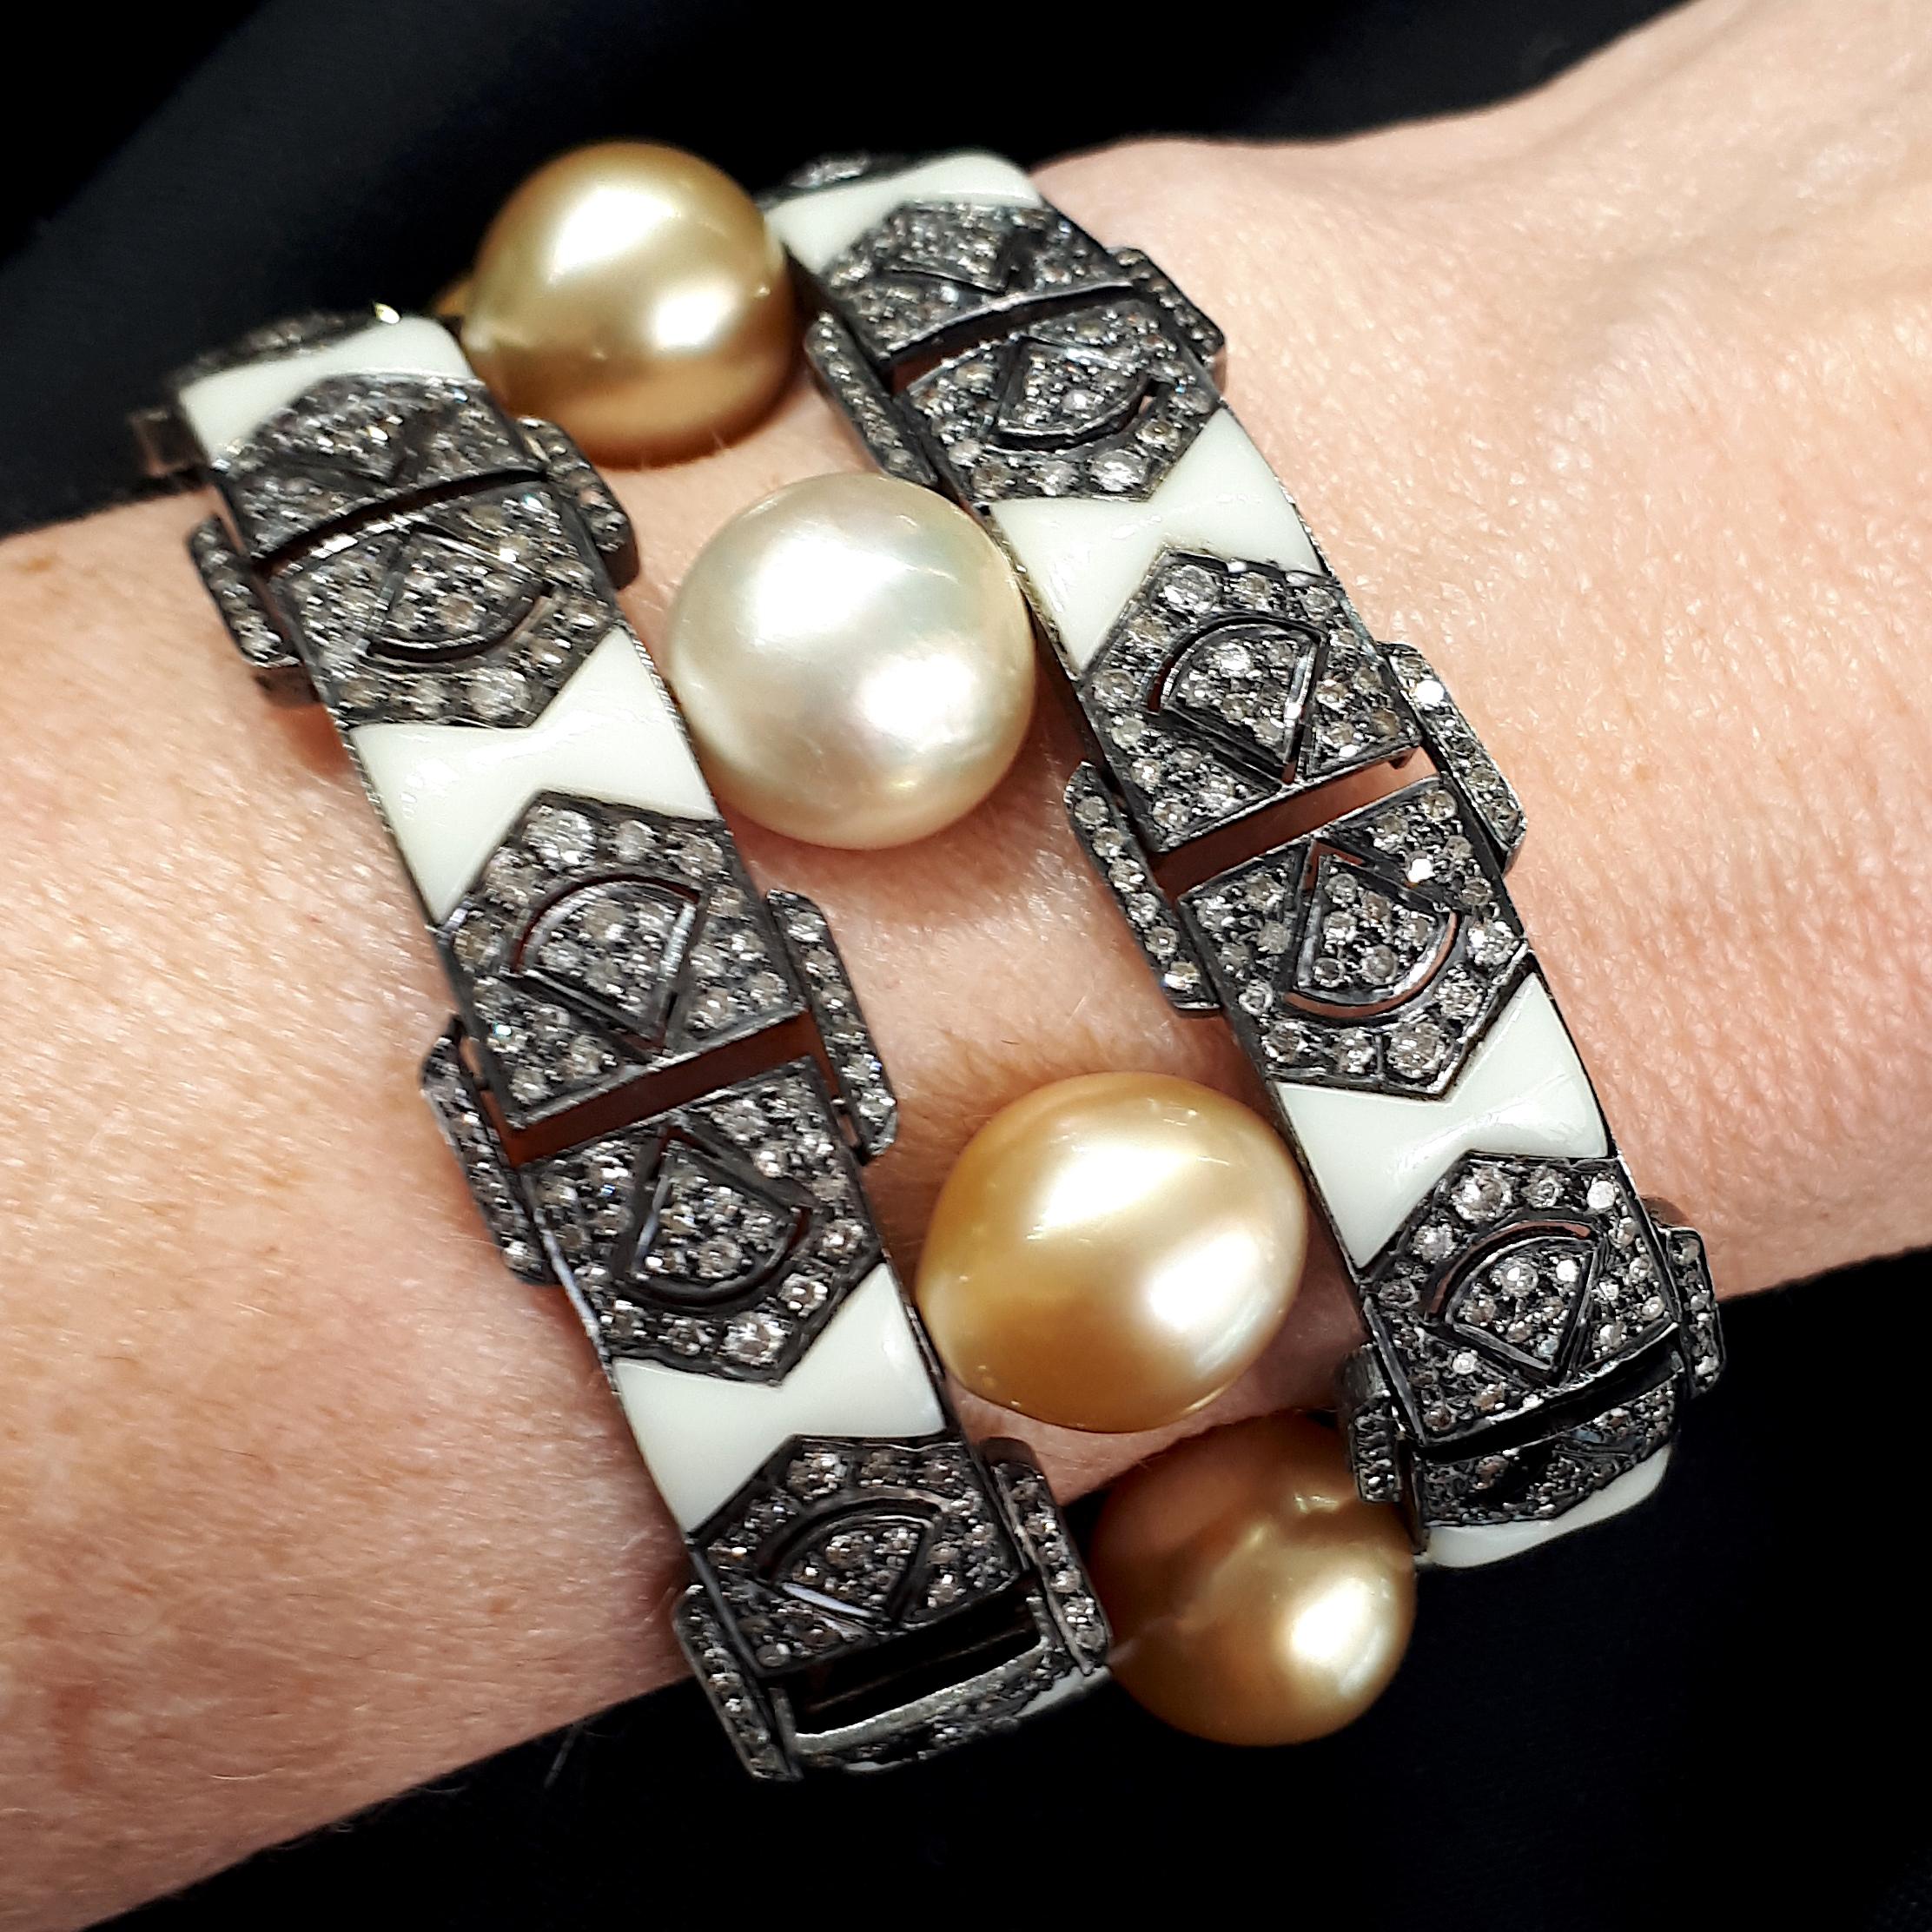 A pearl, diamond and Bakelite Bracelet, with eight, gold coloured South Sea pearls, with a total weight of 104.75 carats, flanked by two outer rows of polished white Bakelite, and eight-cut diamonds, with a total weight of 7.77 carats, on